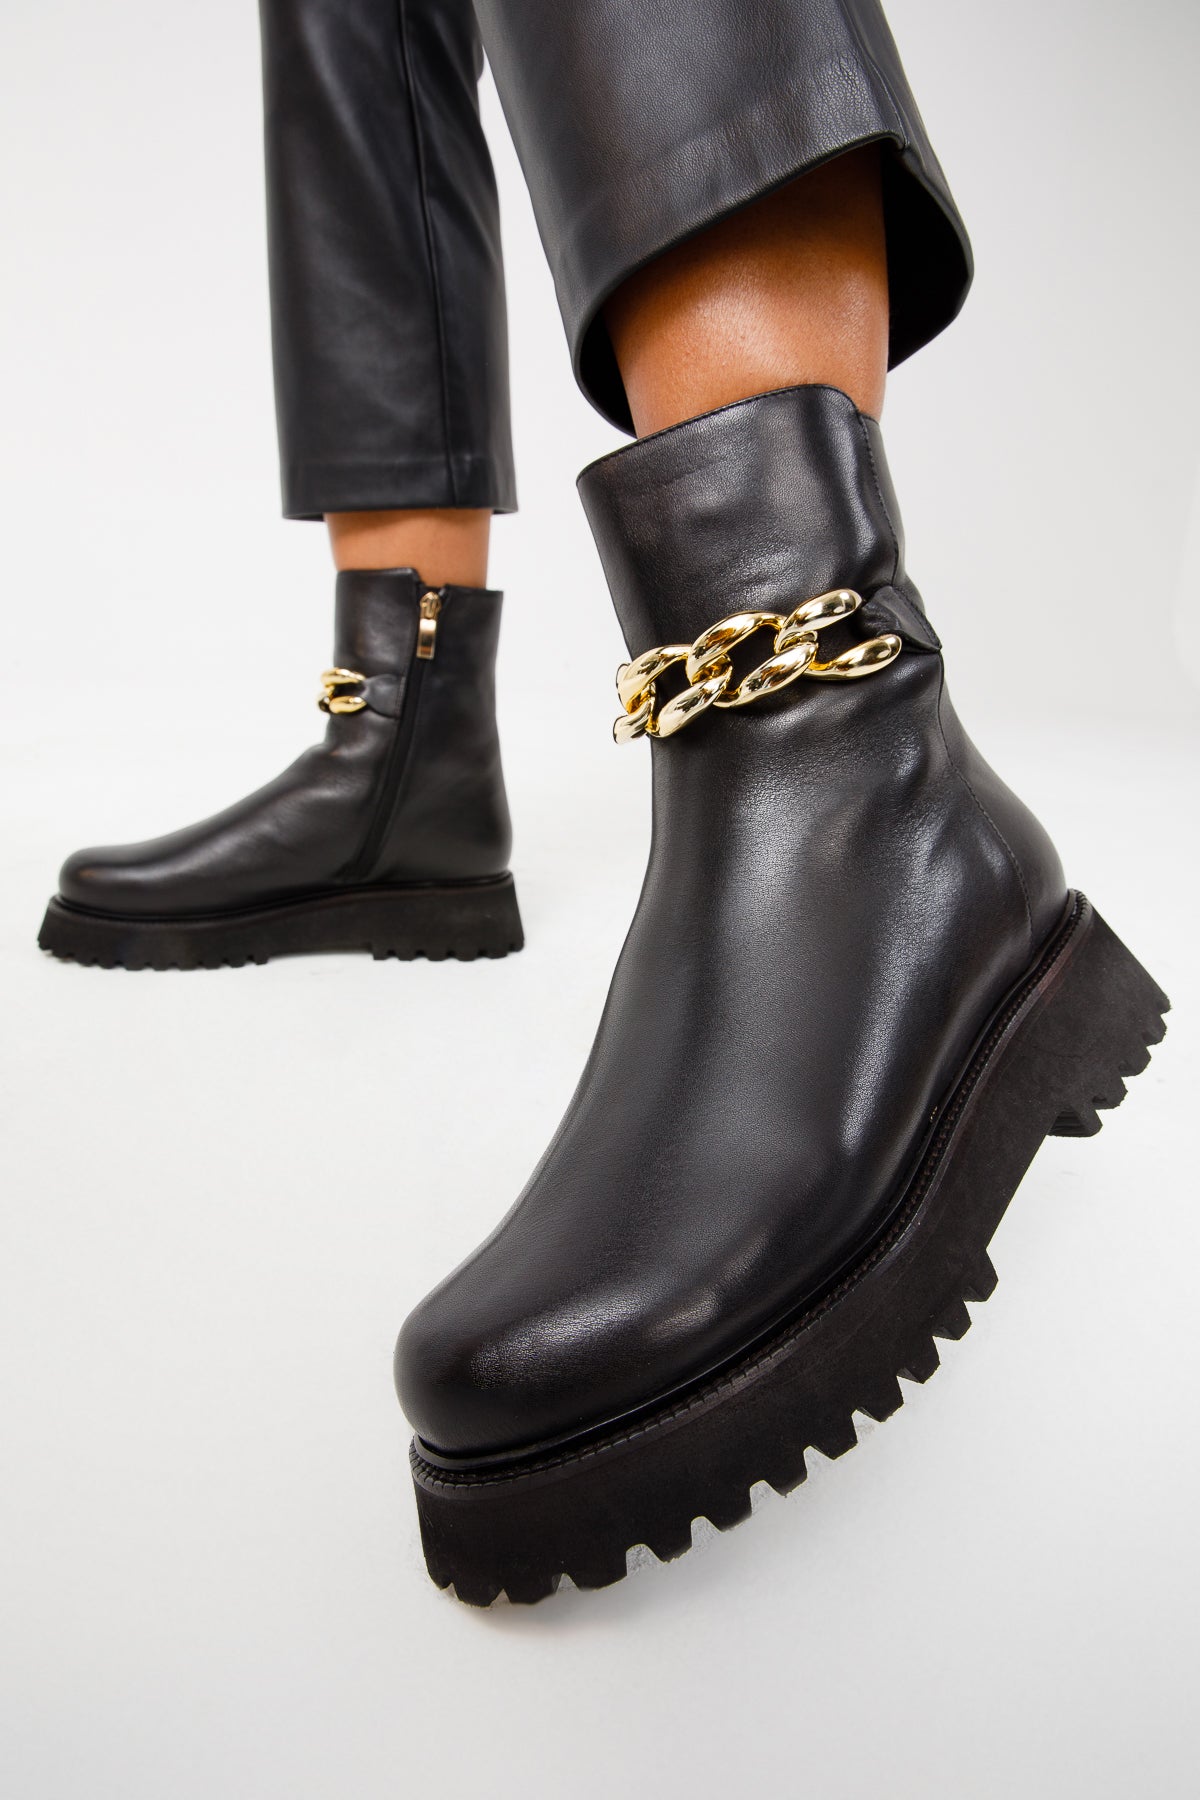 The Nassau Black Leather Ankle Women Boot